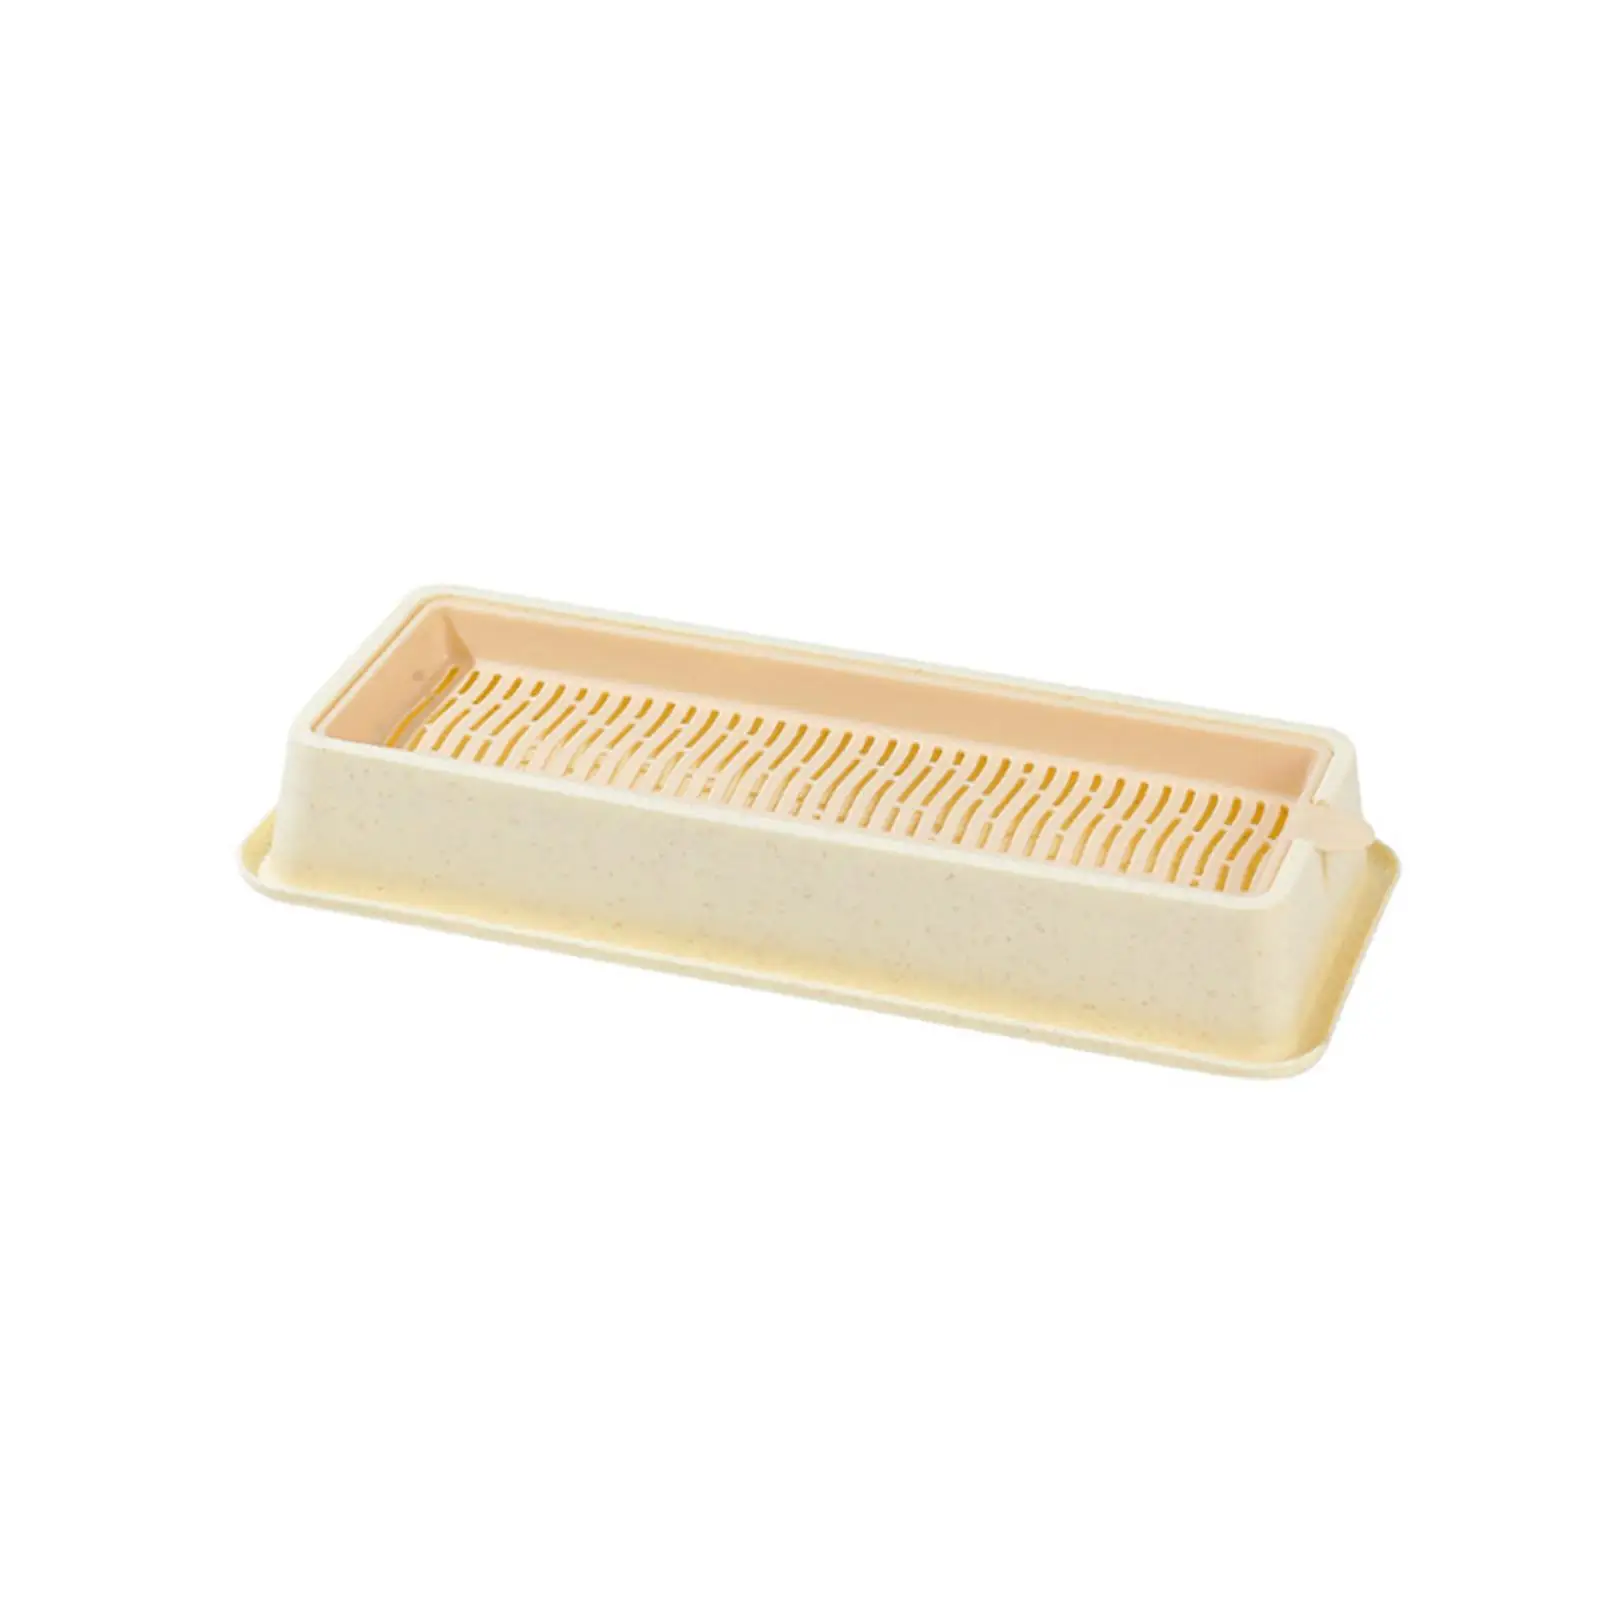 Seed Sprouter Tray Cat Grass Box for Garden Seedling Planting Microgreens